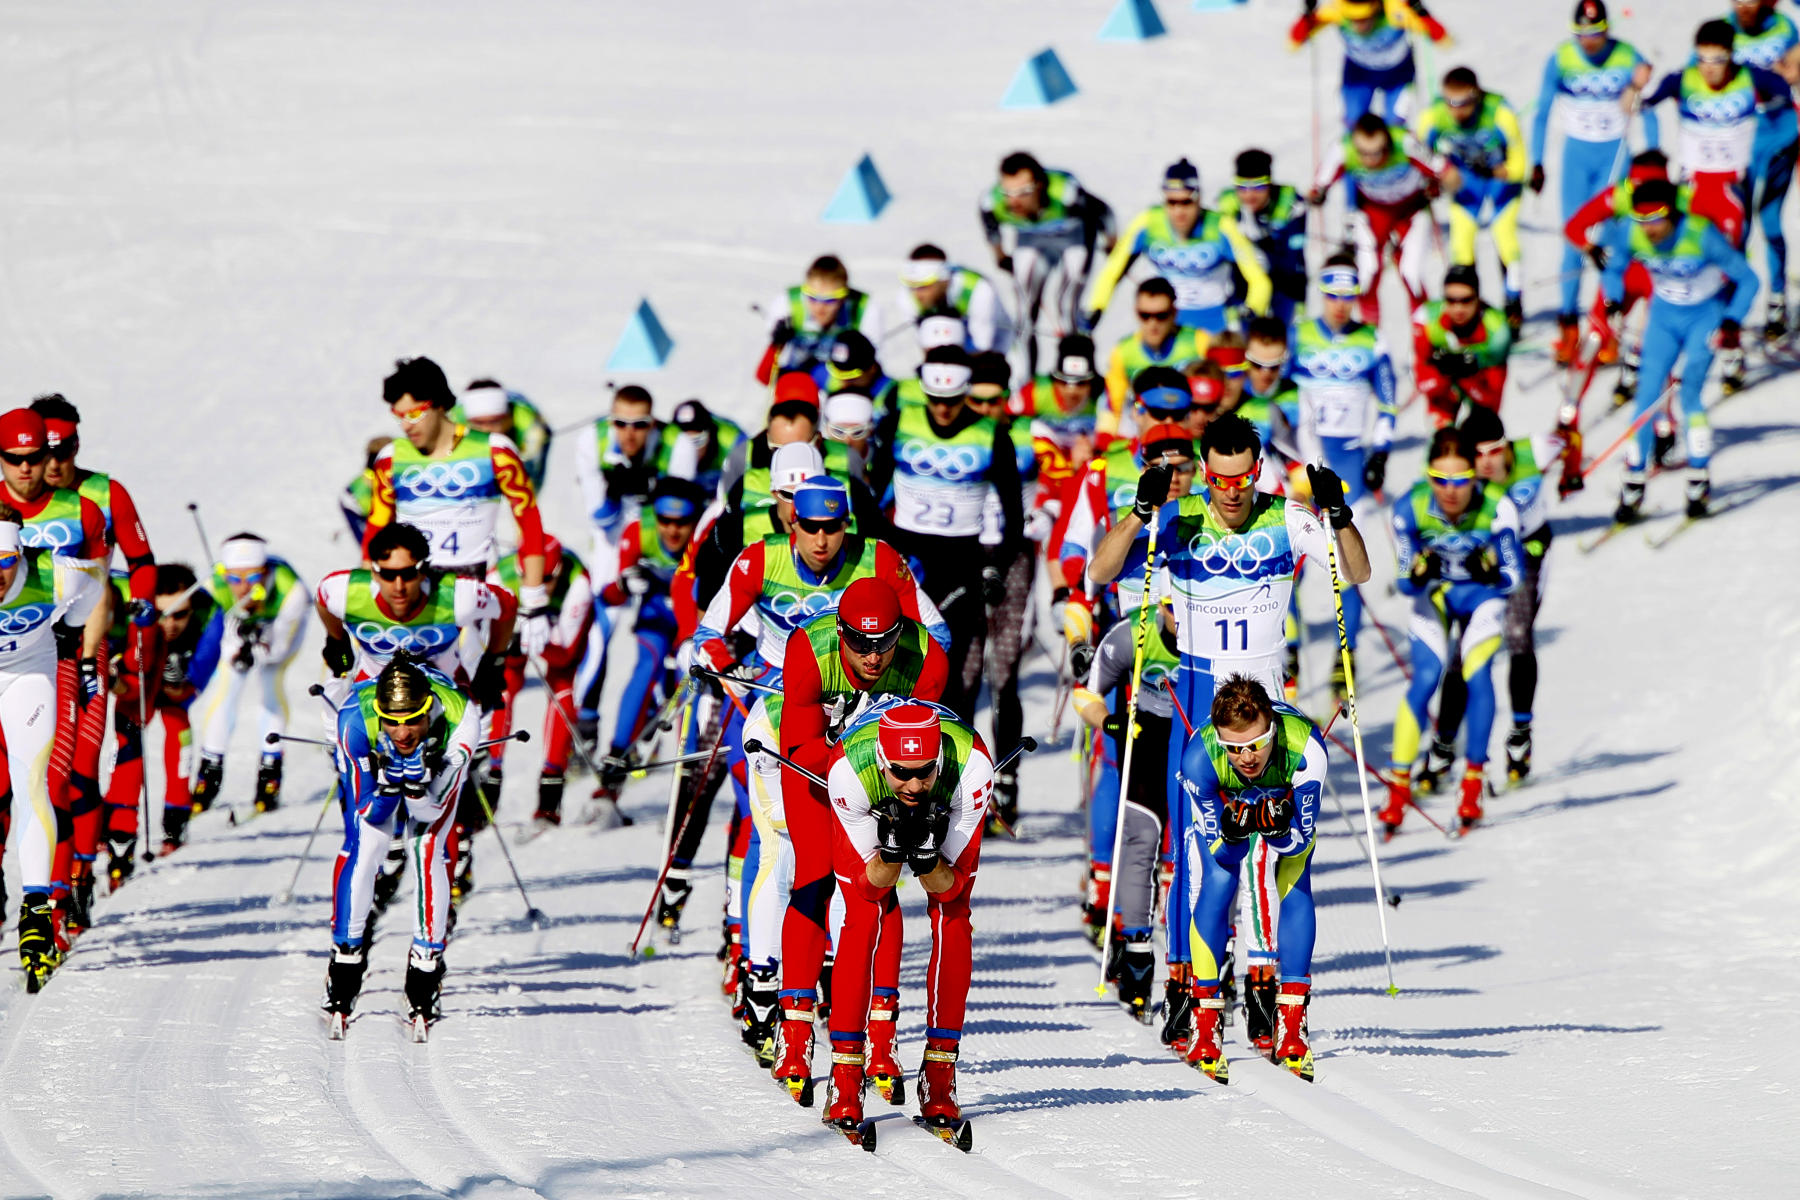 Men's 30K Pursuit Cross Country Skiing competition, Vancouver Olympics.  : Olympics : Photography by Adam Stoltman: Sports Photography, The Arts, Portraiture, Travel, Photojournalism and Fine Art in New York